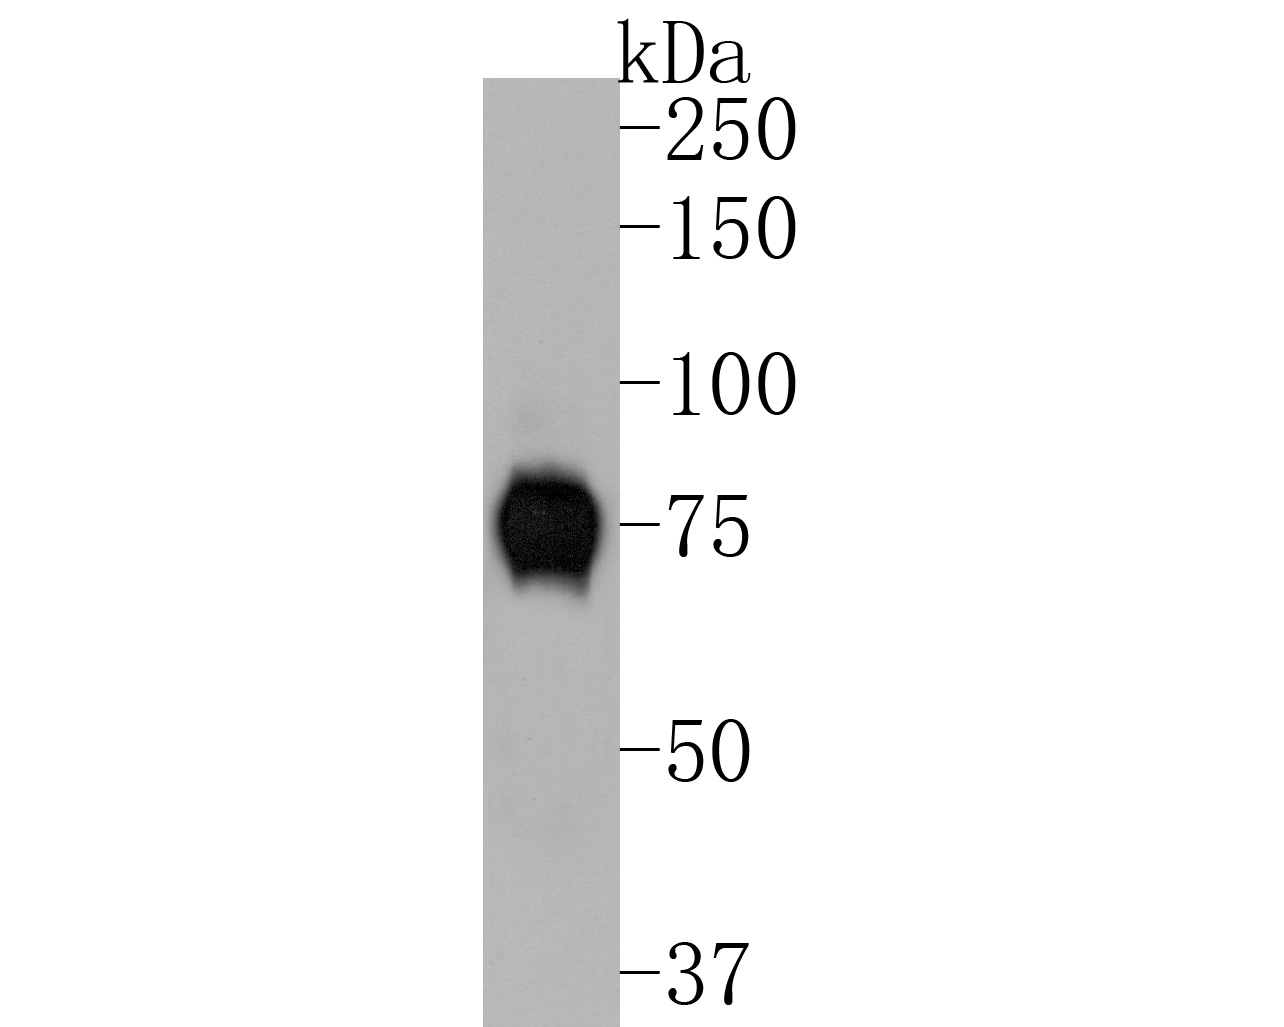 Western blot analysis of Tyrosinase on B16F1 cell lysates. Proteins were transferred to a PVDF membrane and blocked with 5% BSA in PBS for 1 hour at room temperature. The primary antibody (ET1704-18, 1/500) was used in 5% BSA at room temperature for 2 hours. Goat Anti-Rabbit IgG - HRP Secondary Antibody (HA1001) at 1:200,000 dilution was used for 1 hour at room temperature.